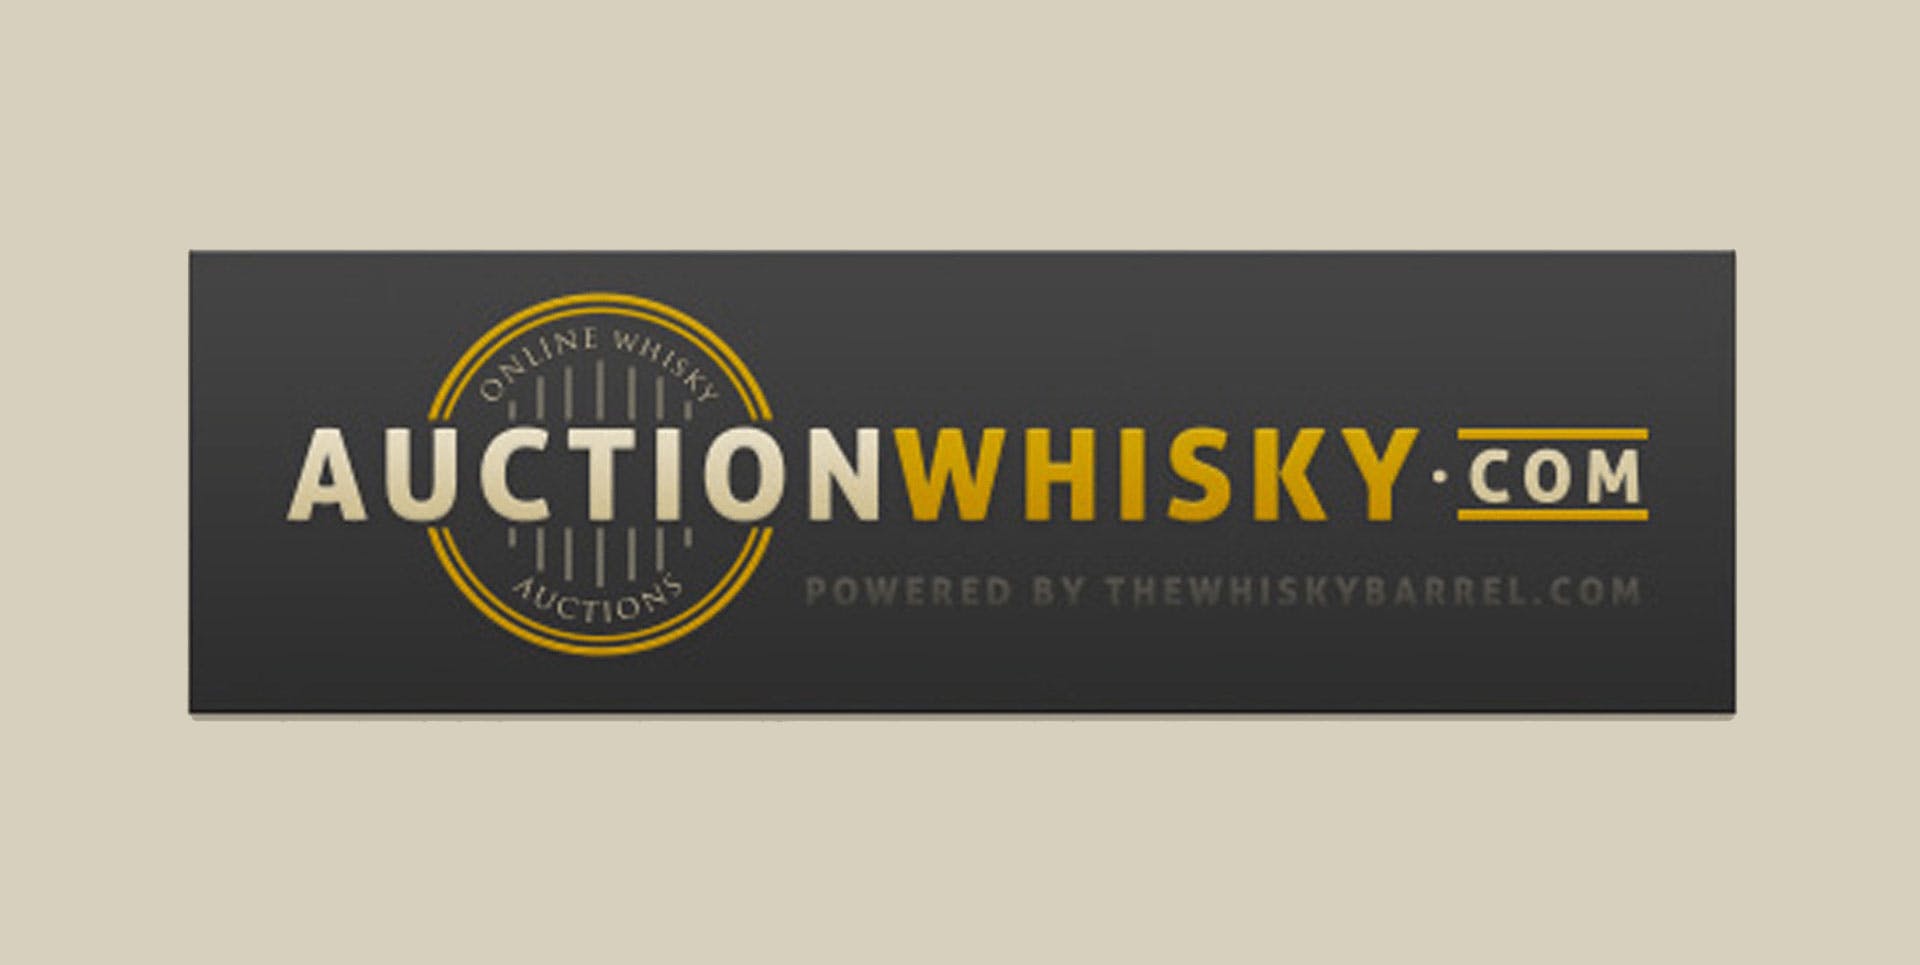 Digital Six Launches Auction Whisky Website